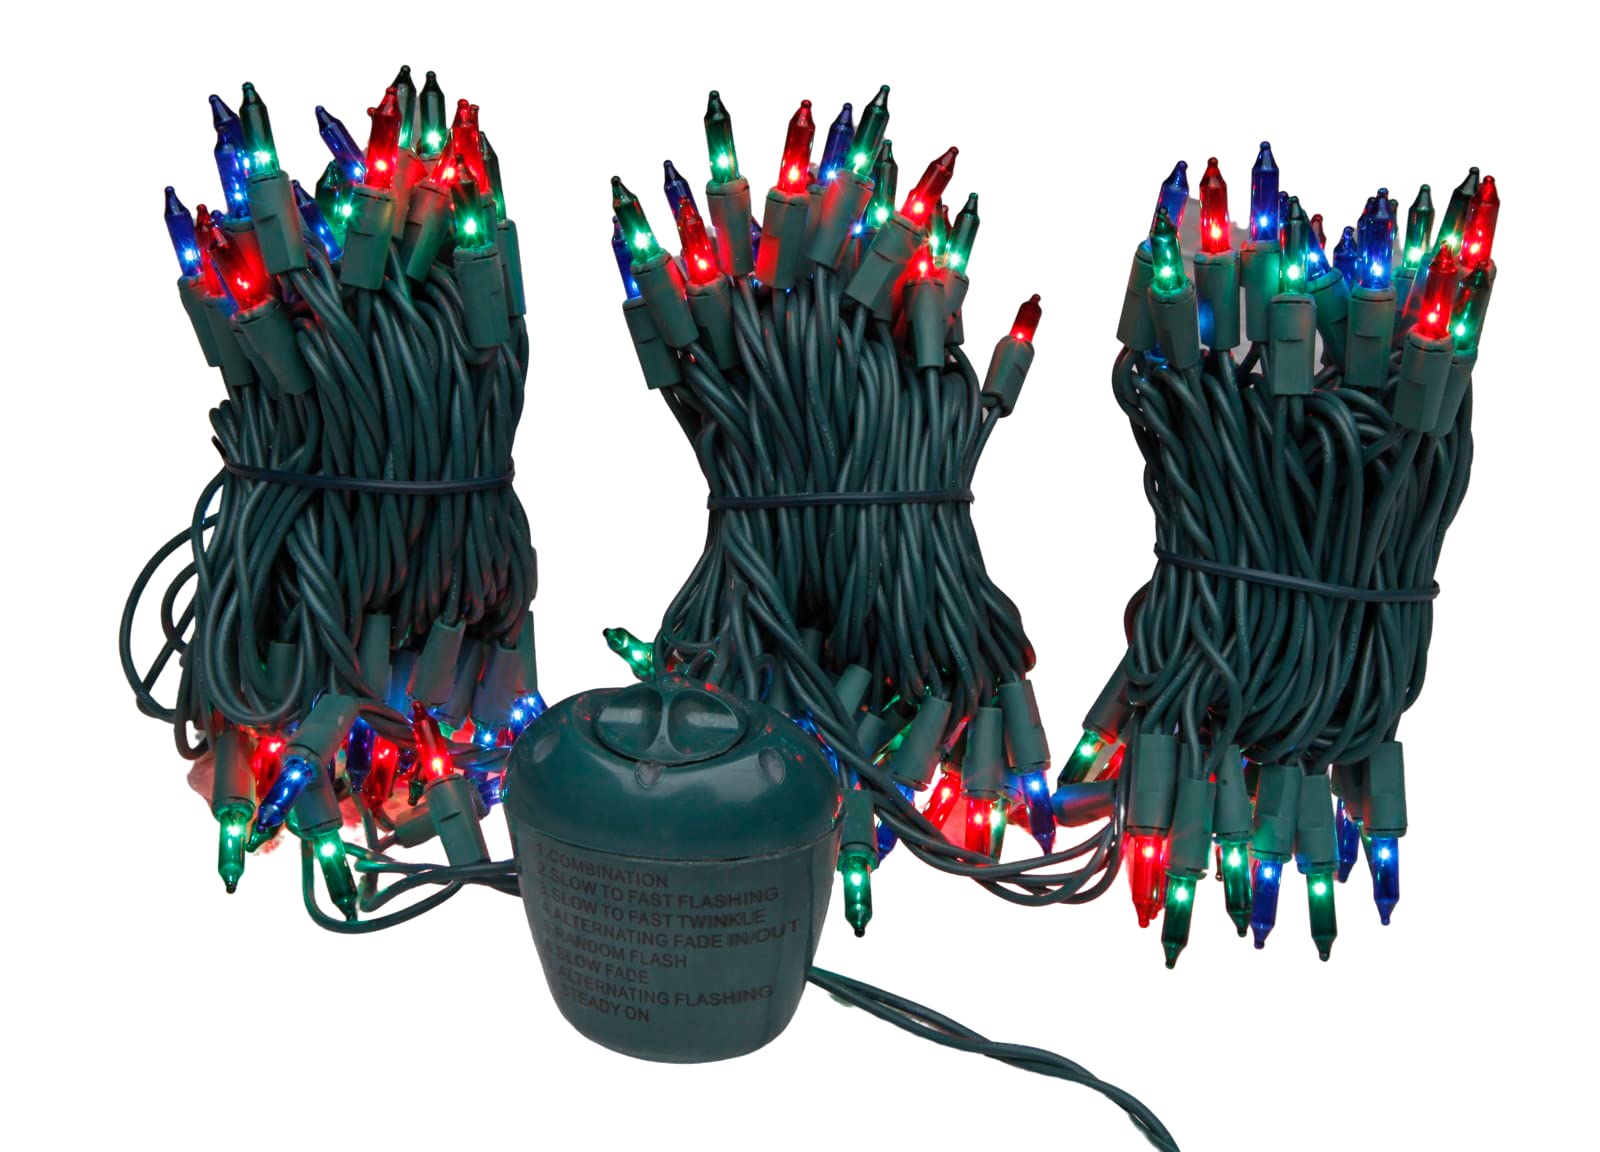 2 Packs of DecoBrite Multicolor 8 Mode Function 150 ct. Indoor/Outdoor Christmas String Lights (2pks, Multicolor)